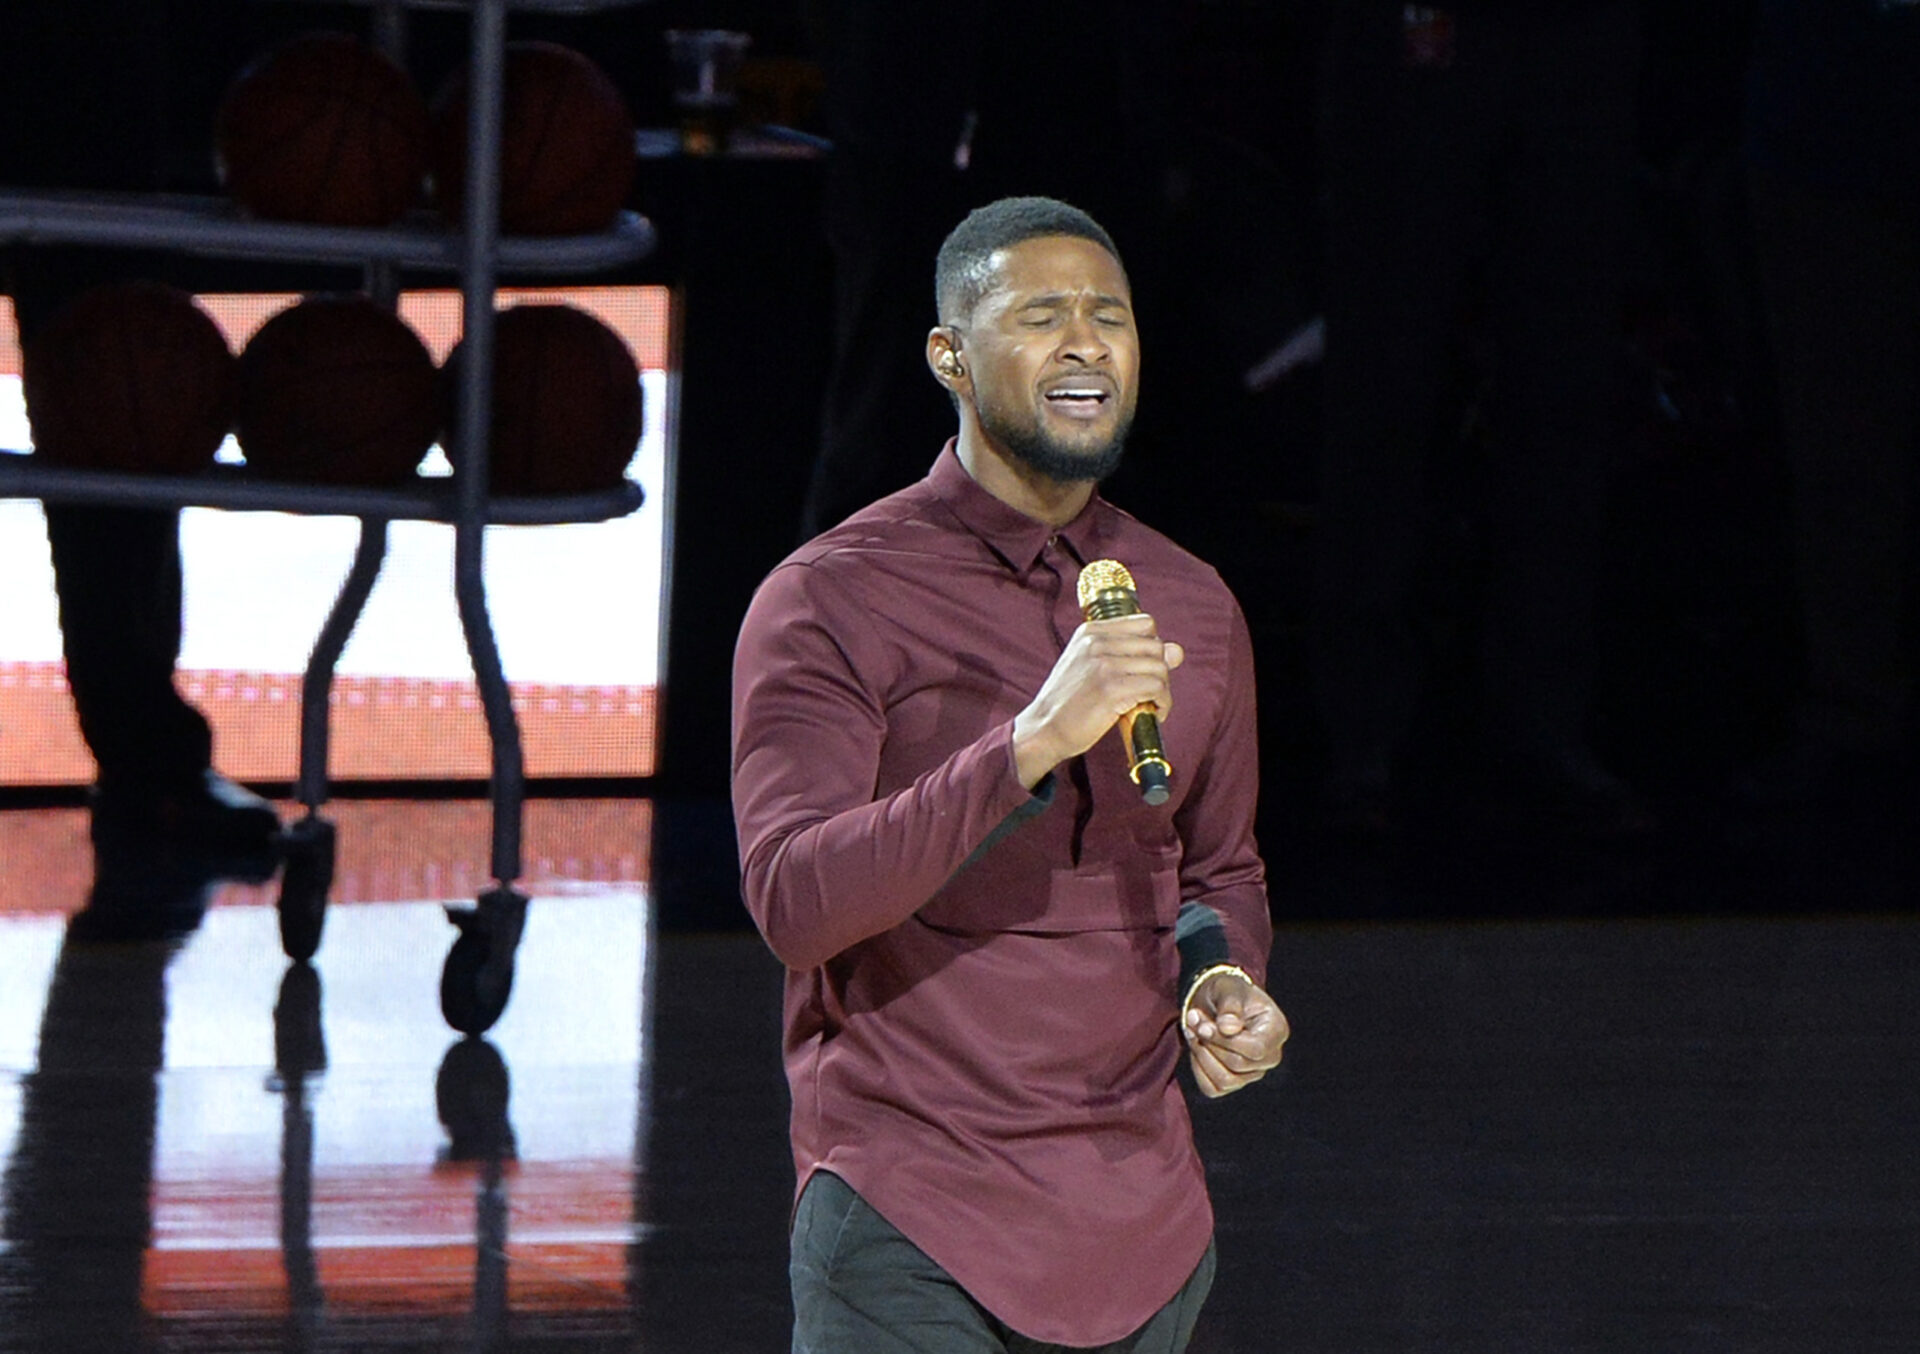 Recording artist Usher performs the national anthem prior to the game between the New York Knicks and the Cleveland Cavaliers at Quicken Loans Arena.